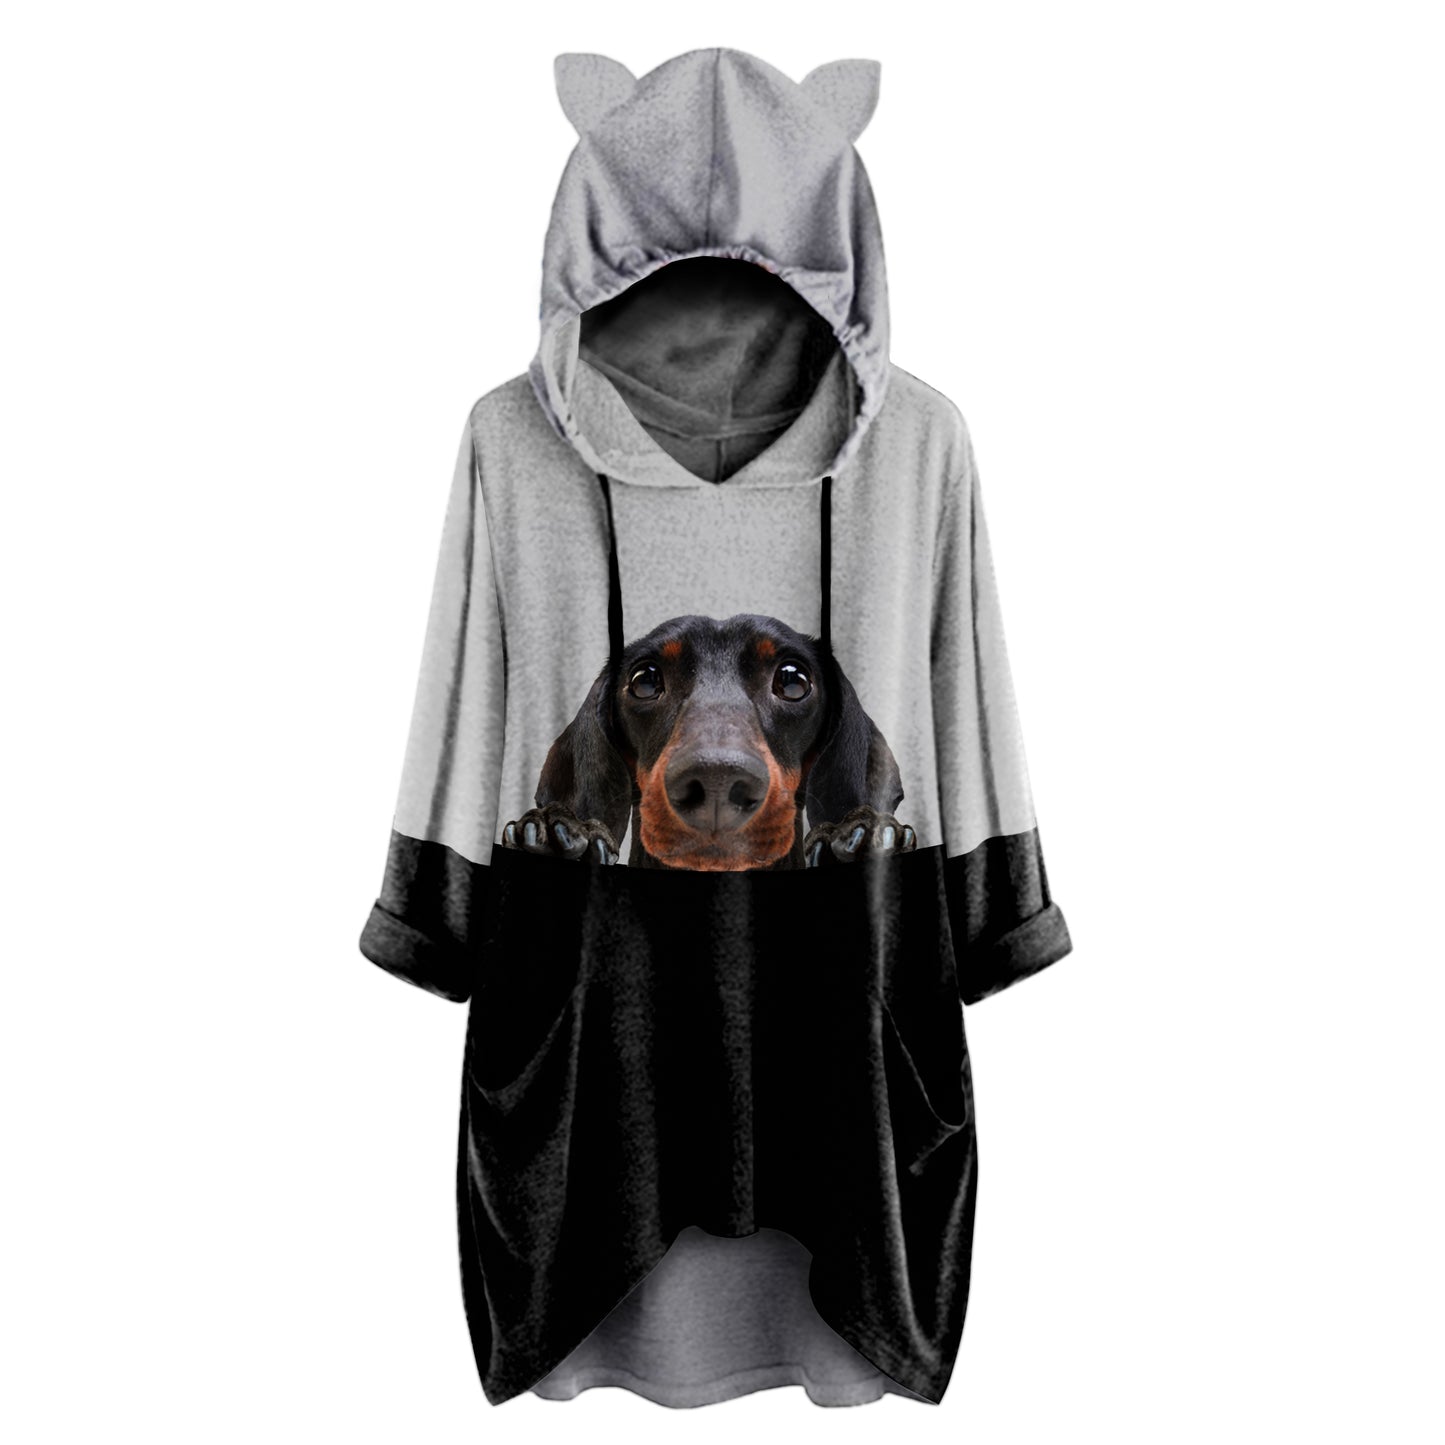 Can You See Me Now - Dachshund Hoodie With Ears V3